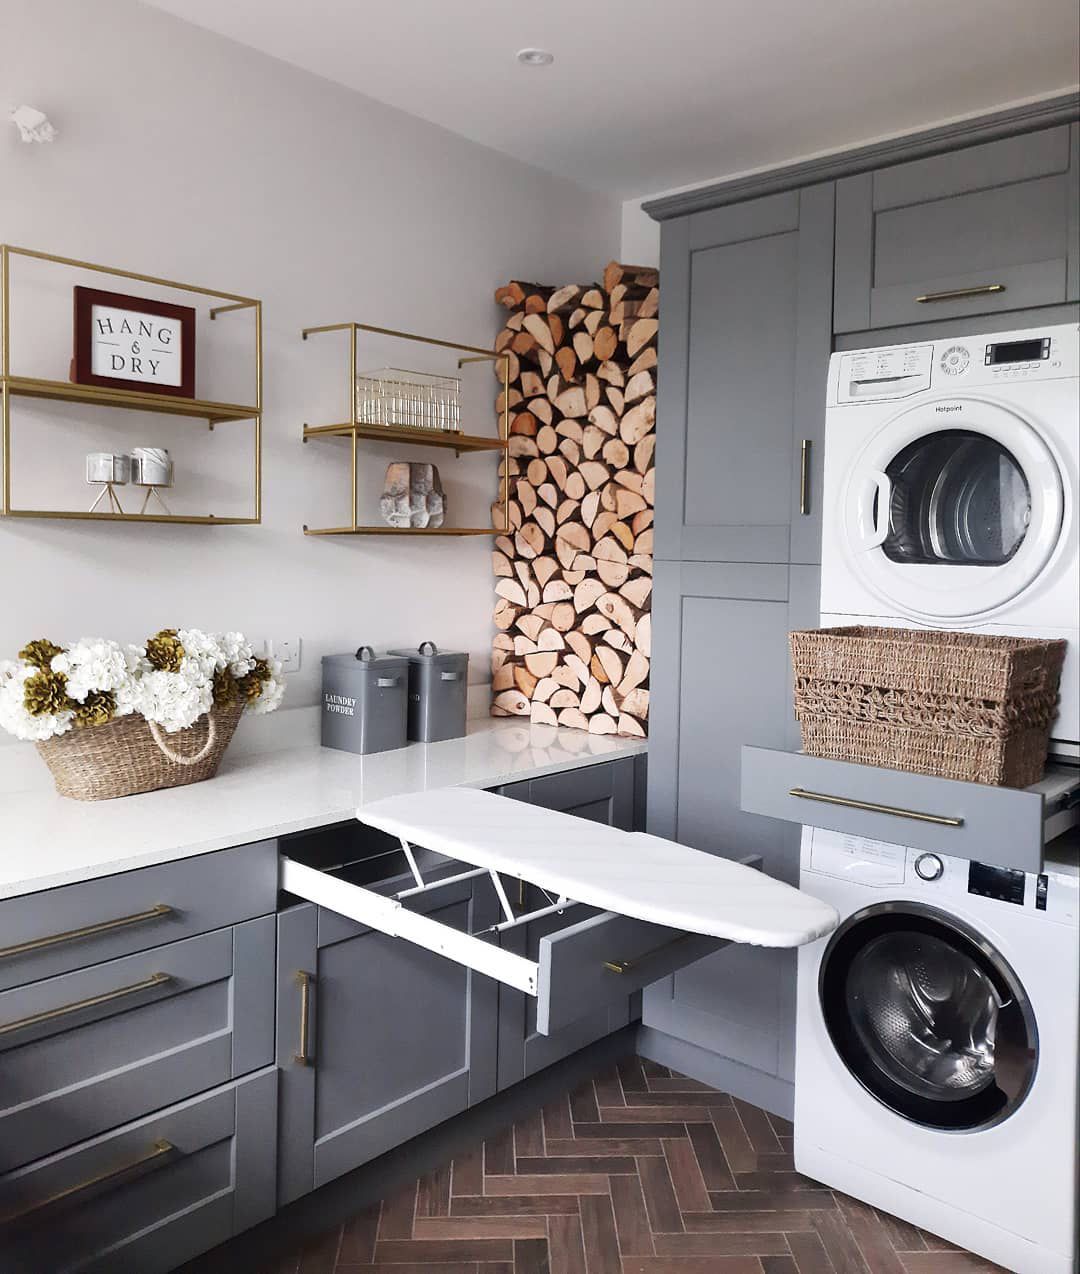 Laundry room shelving ideas – 12 ways to create a neat space